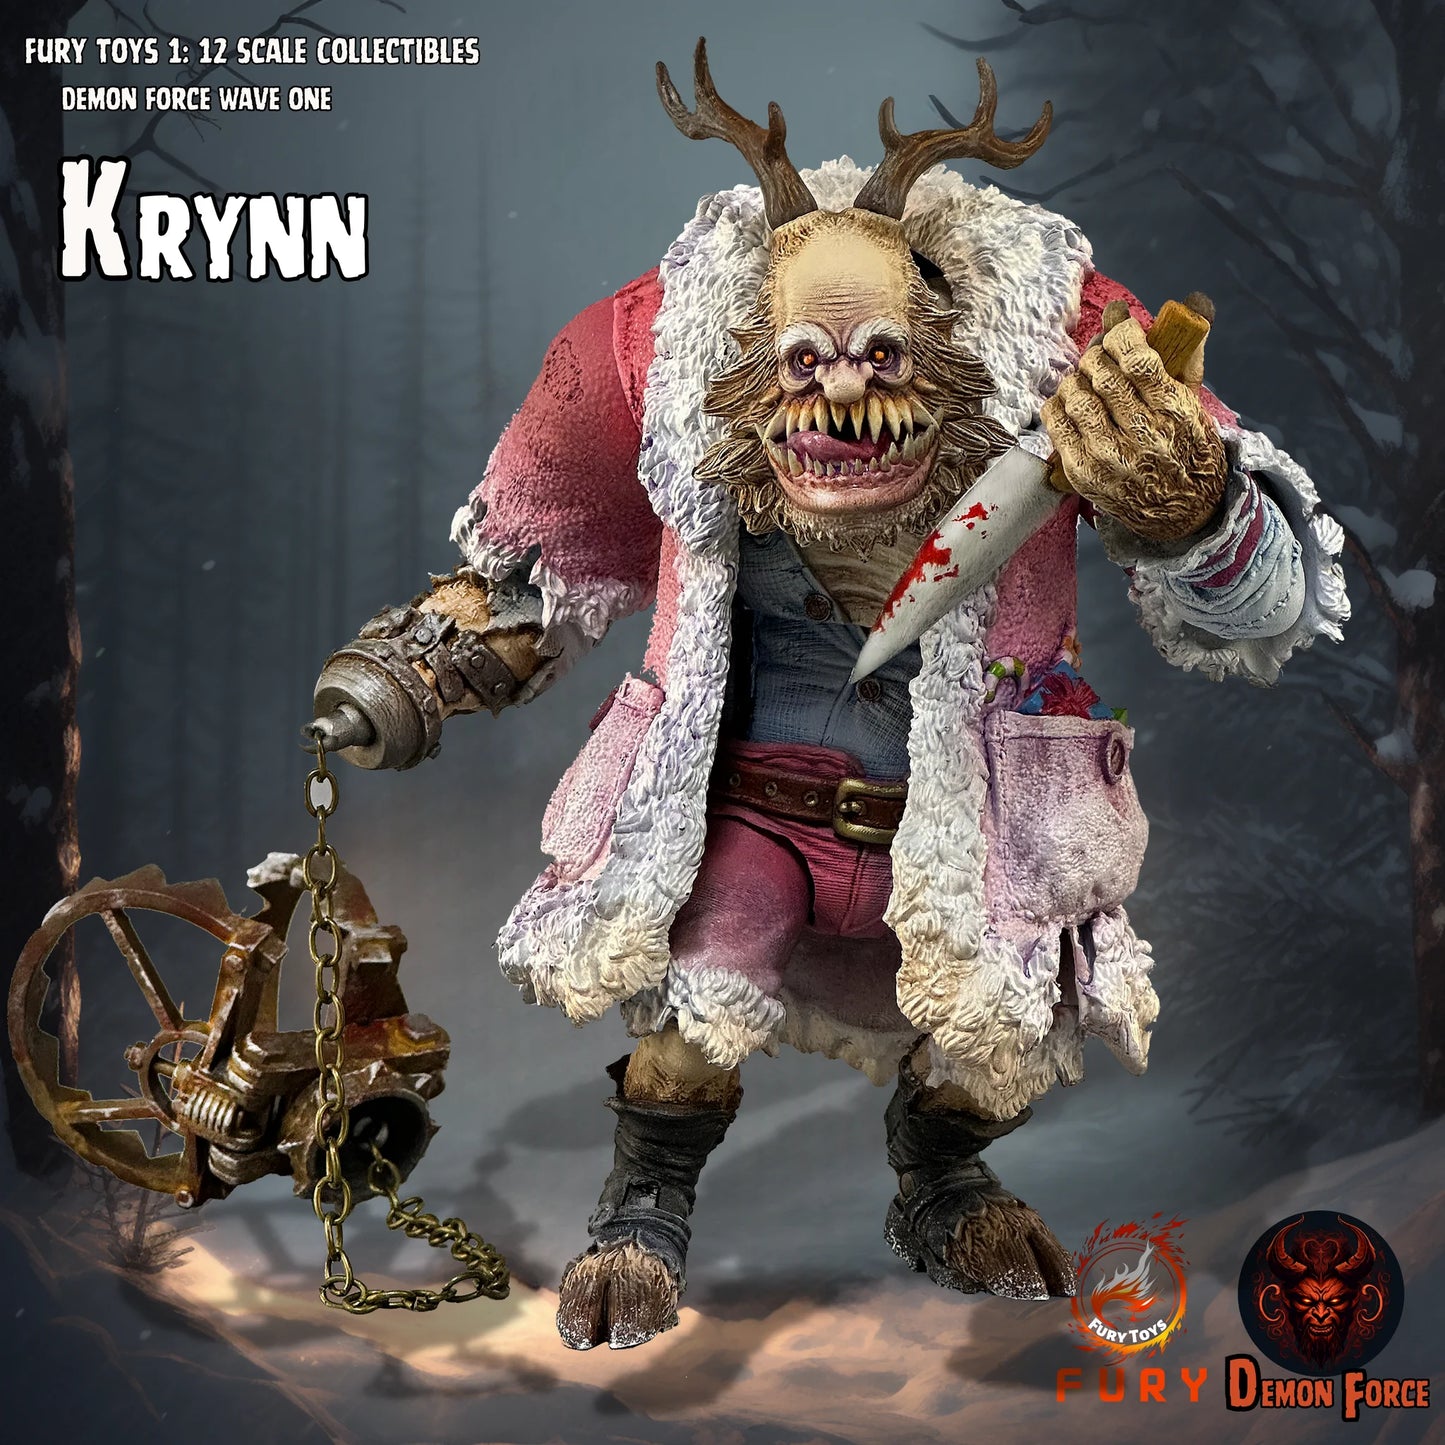 (Pre-Order) Fury toys Demon Force wave 1 1/12 The brother Krynn 7 inches action figure